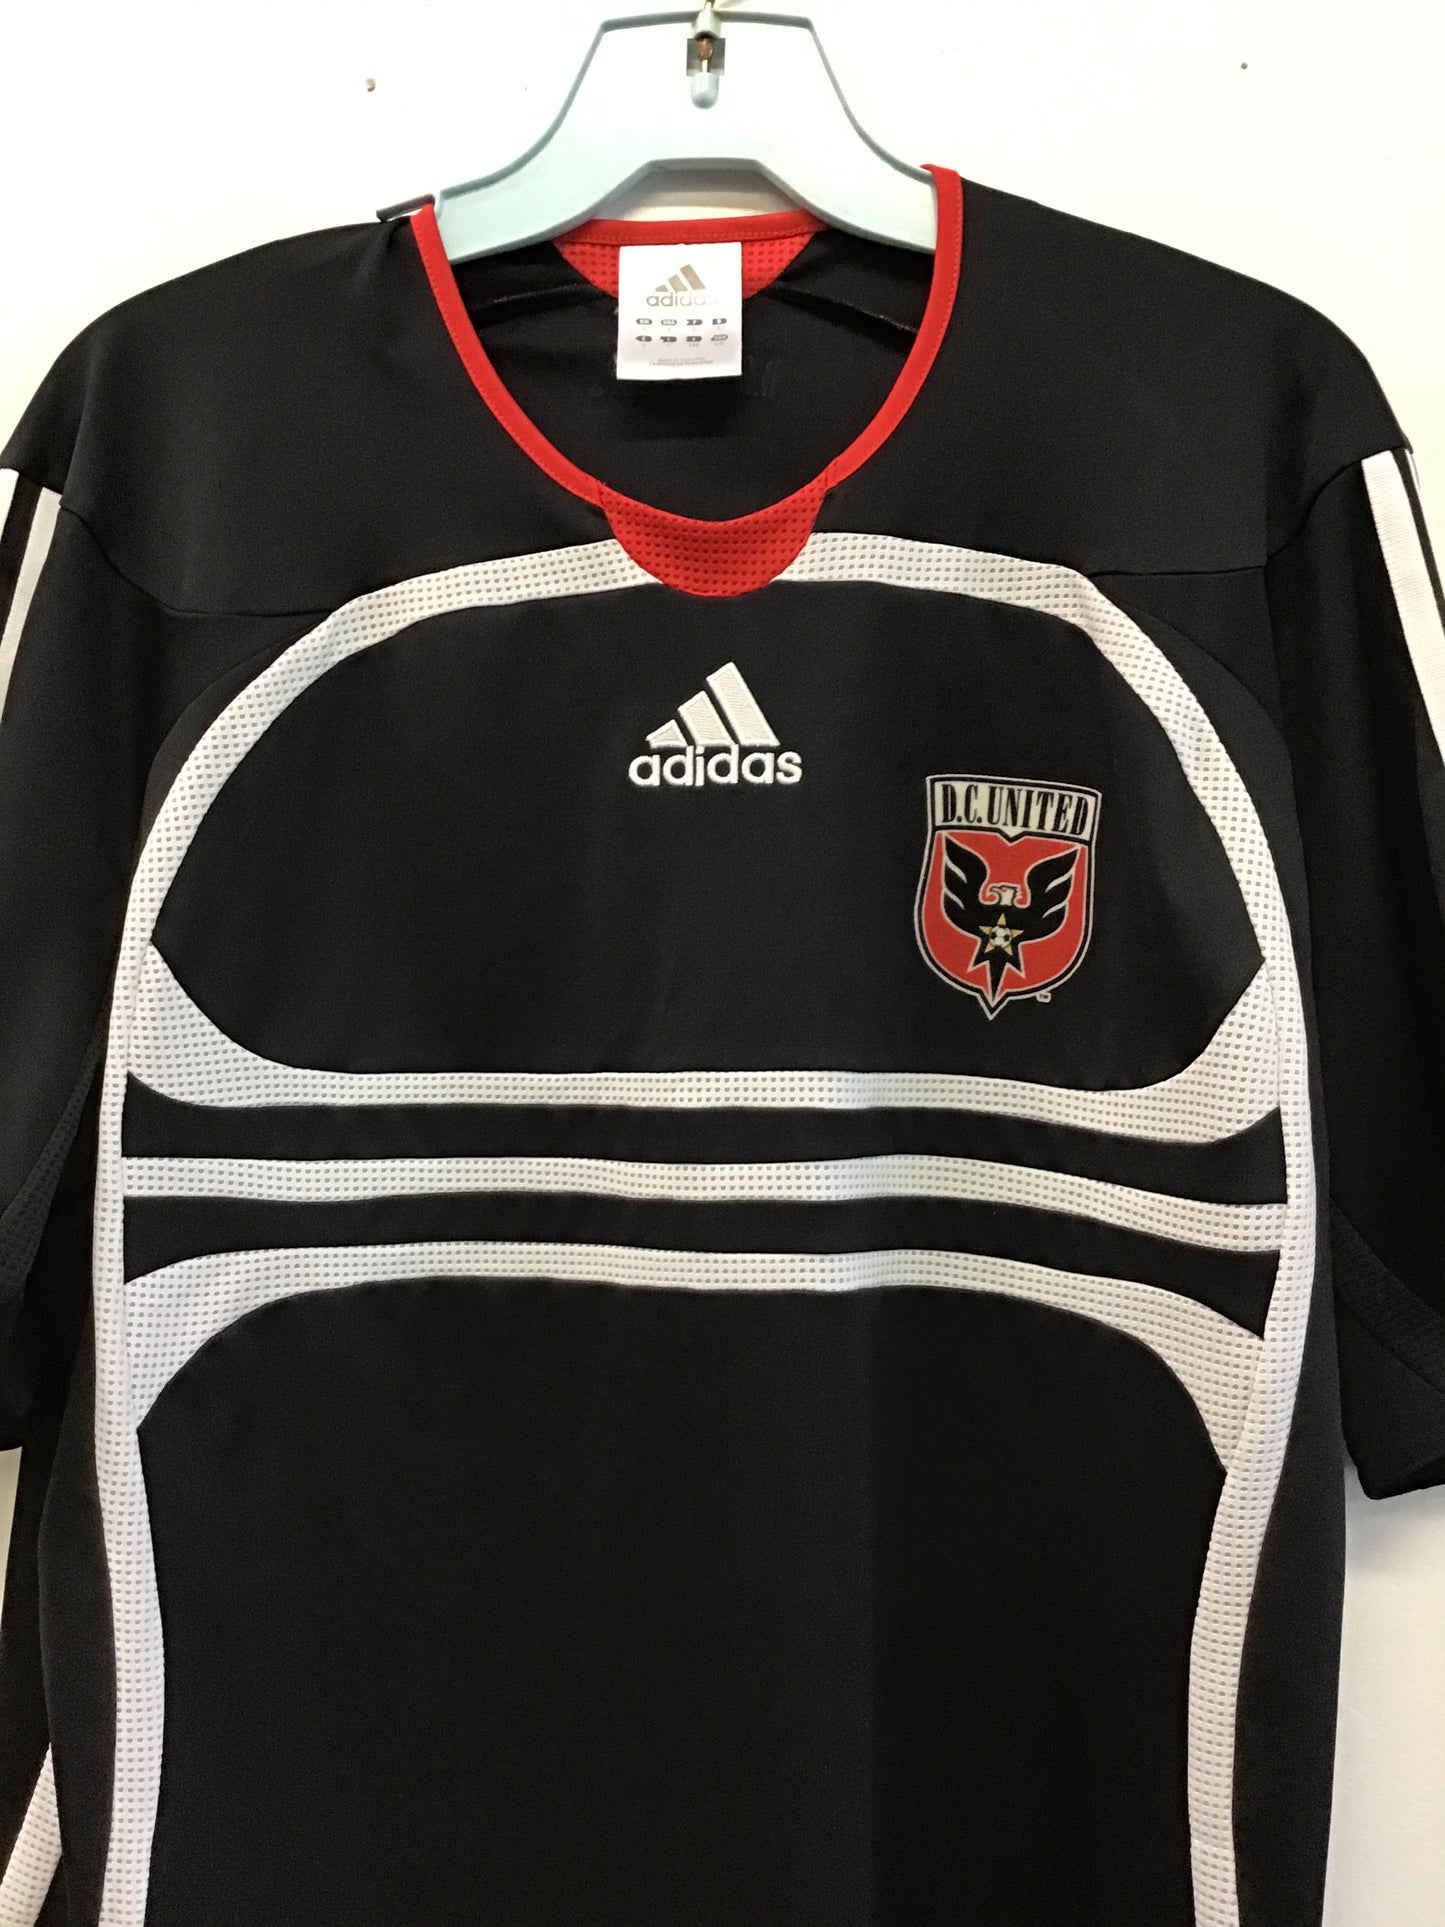 Adidas D.C. United 2006-2007 Home Jersey,  Size L